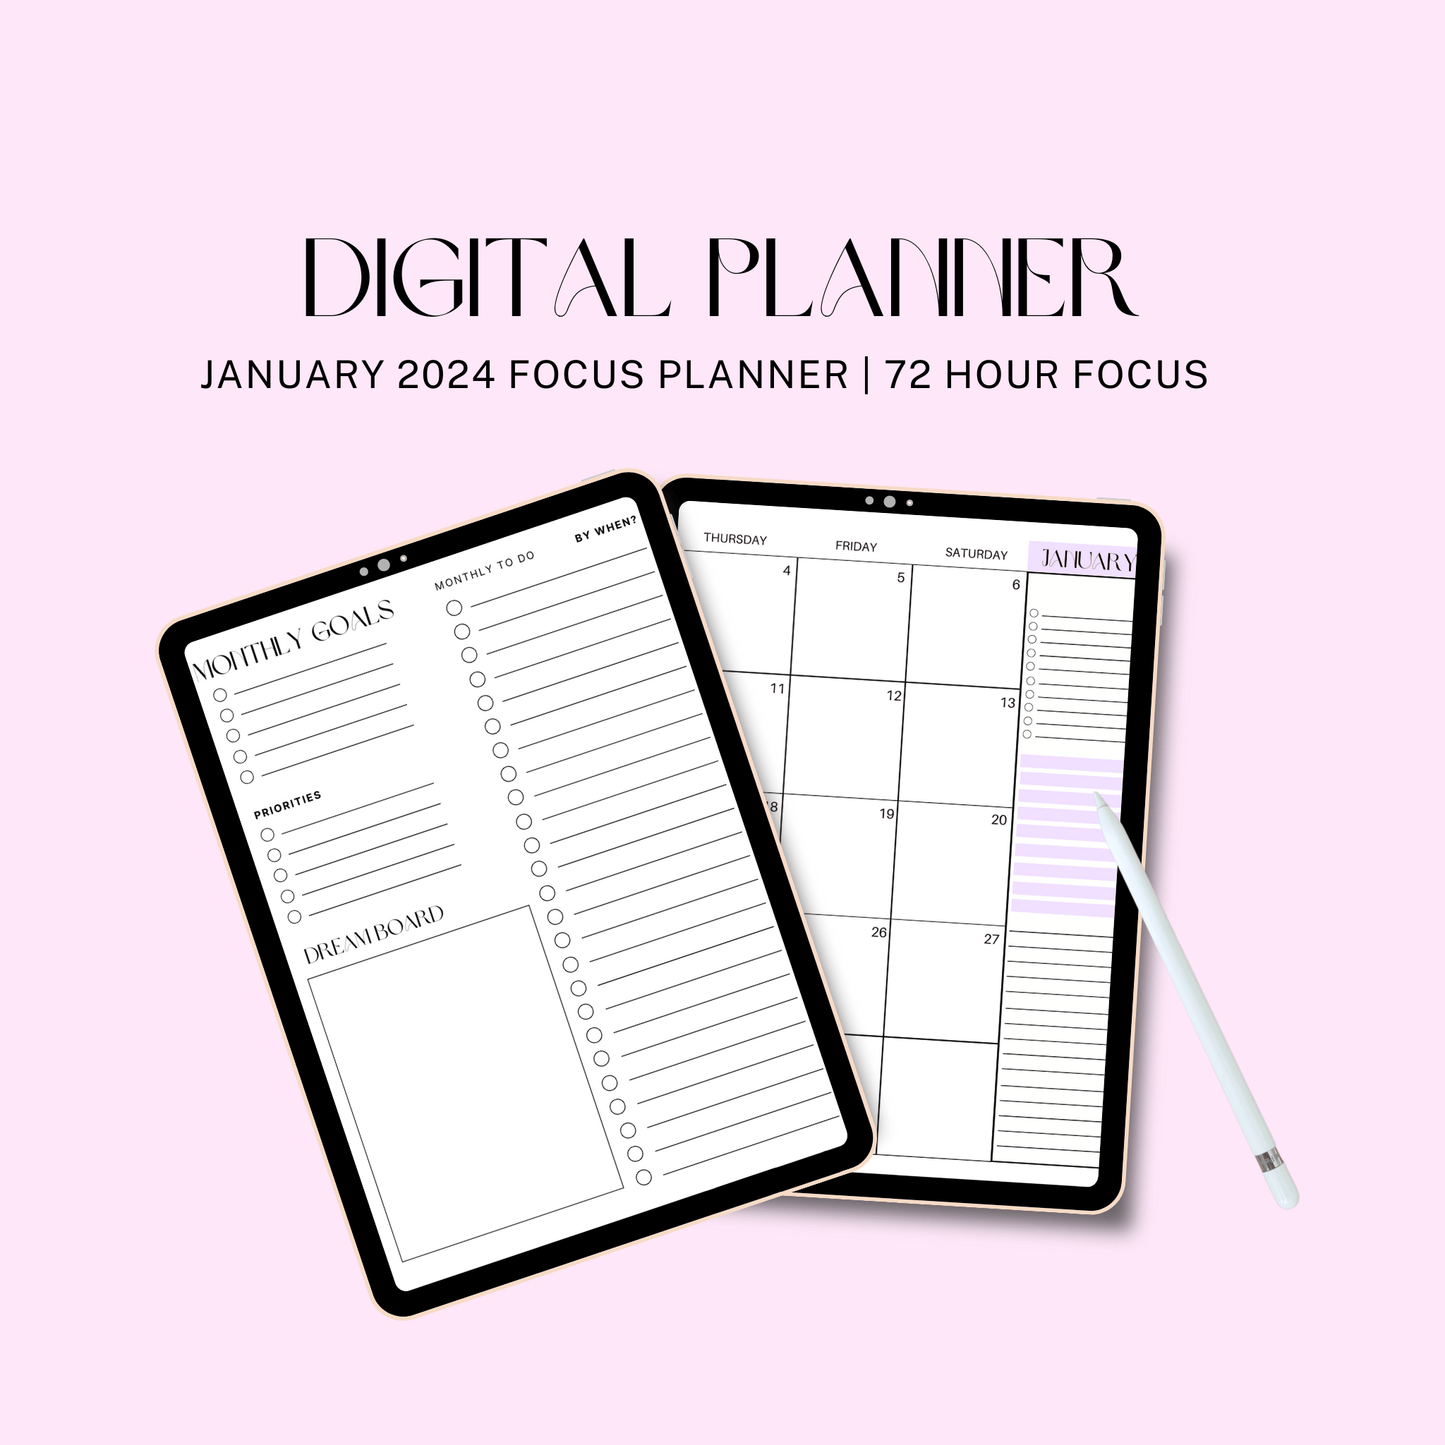 Focus Planner Digital Download: January 2024-December 2024 - By When? Planner Co.